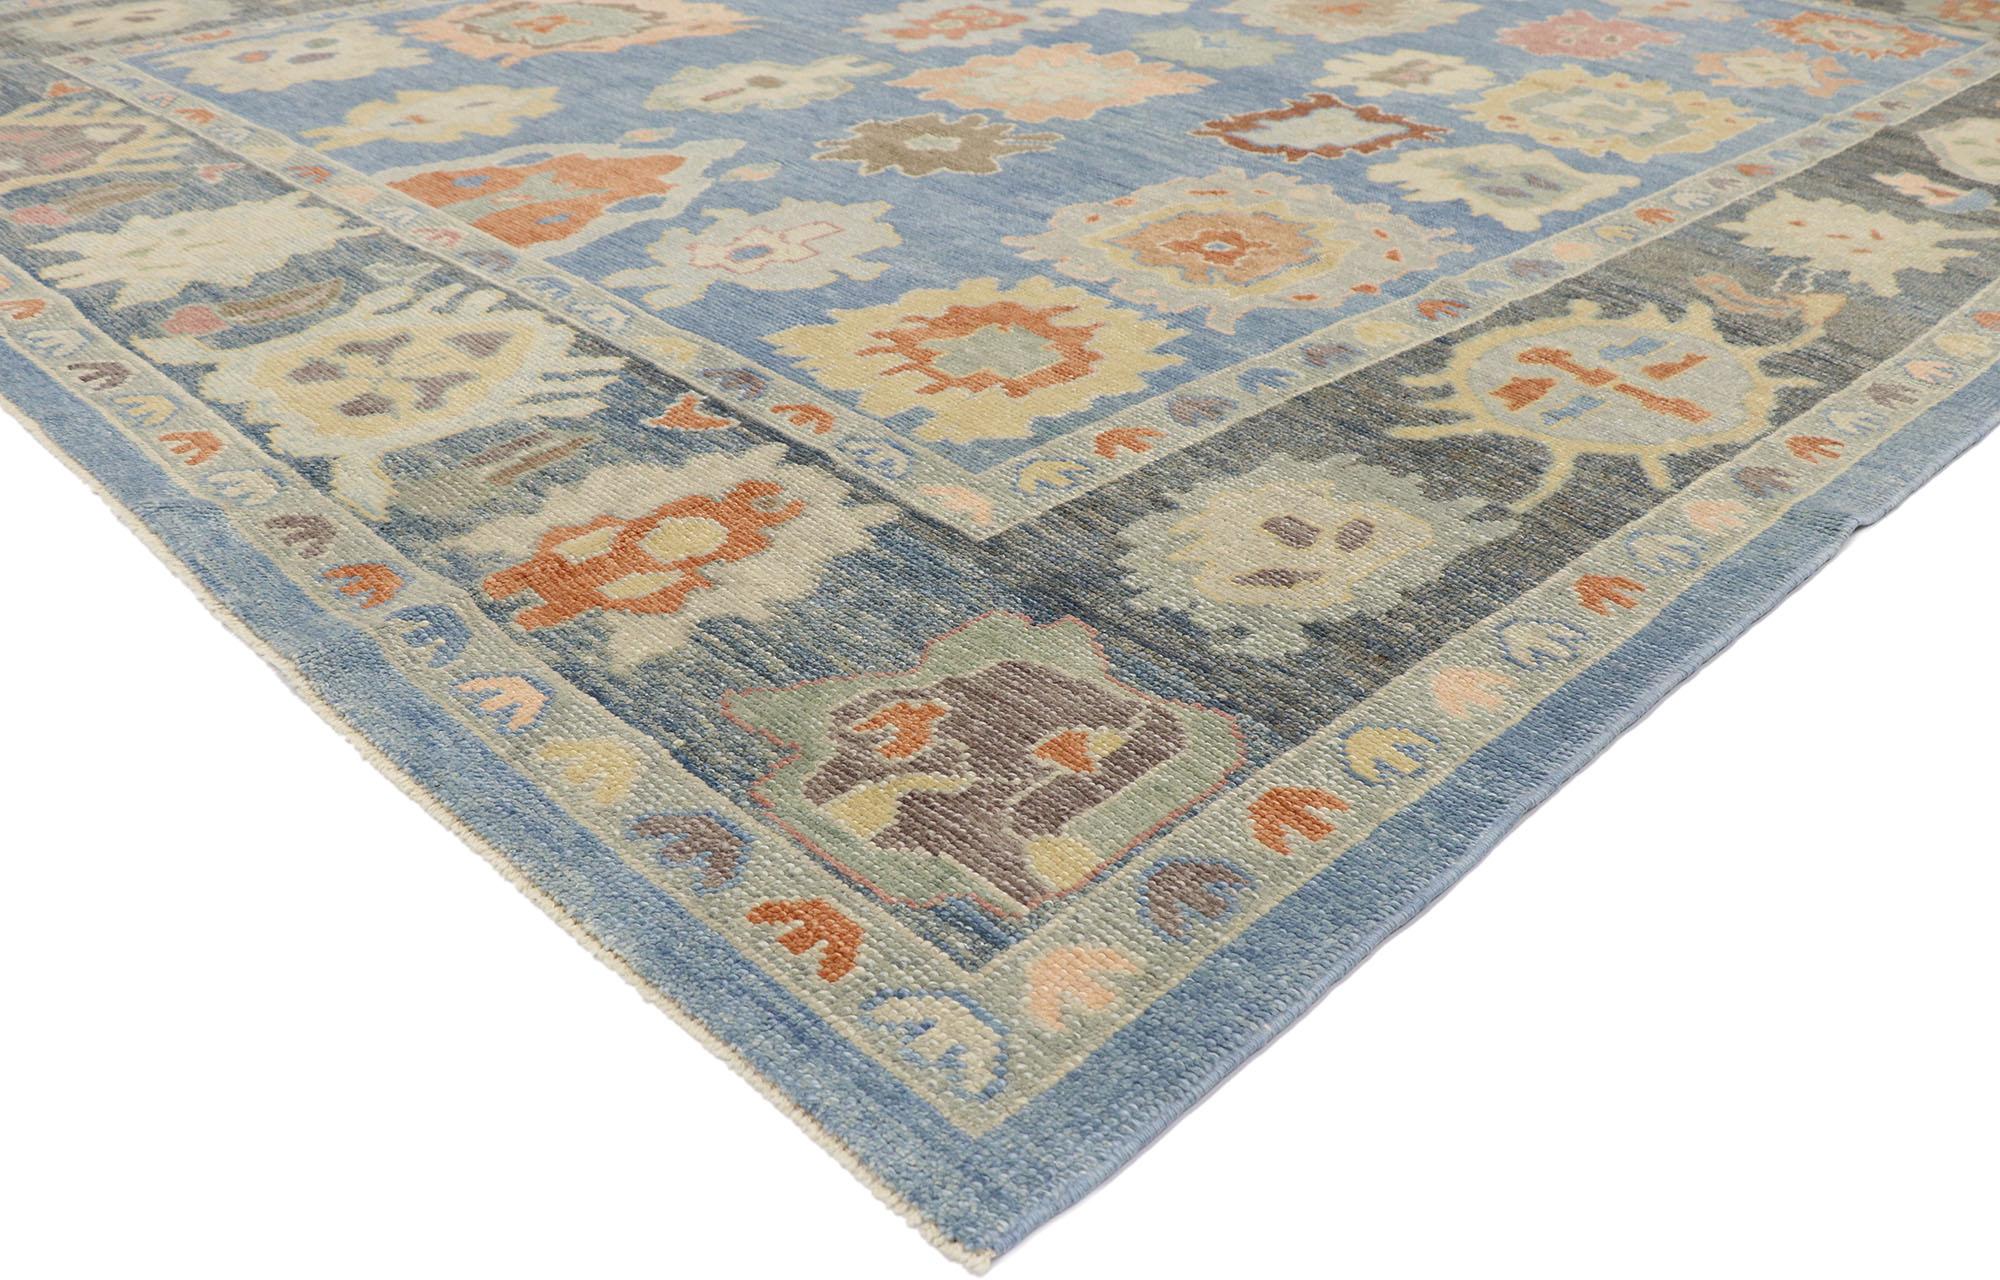 53550, new contemporary blue Turkish Oushak rug with Modern Parisian style. Polished and playful, this hand-knotted wool Turkish Oushak area rug beautifully embodies a modern Parisian style. The abrashed blue field features an array of Harshang